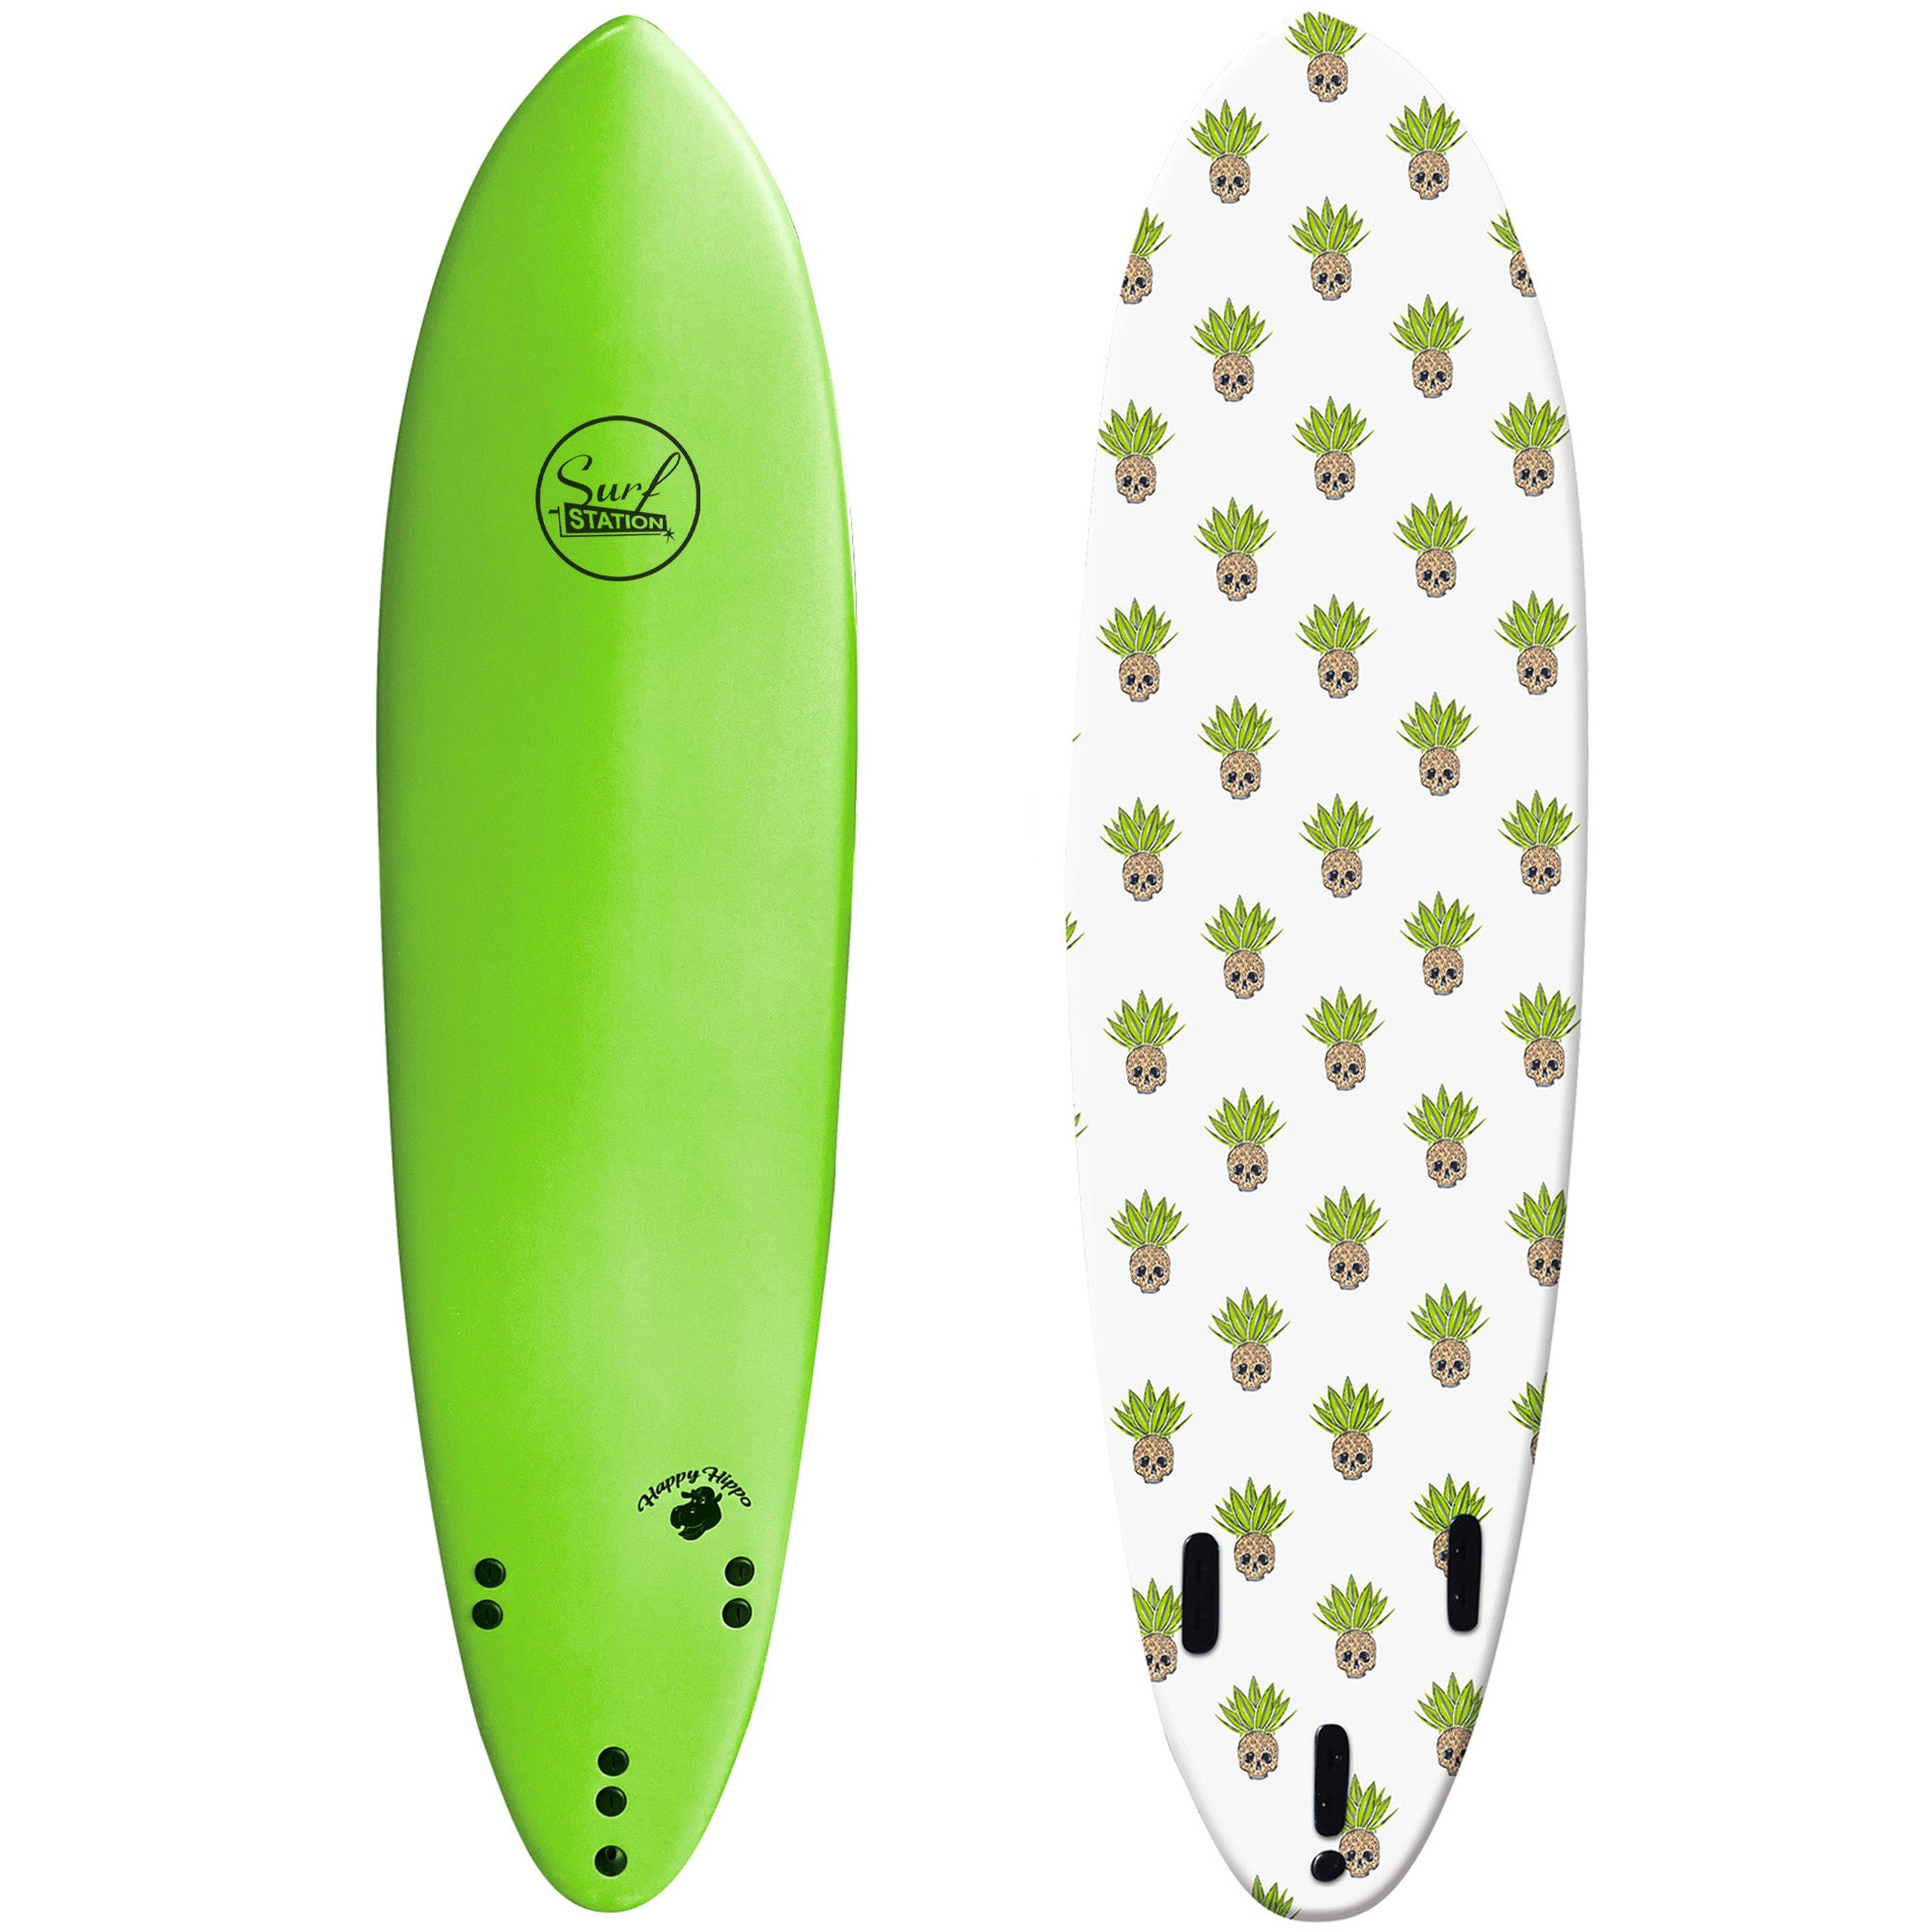 Surf Station Happy Hippo 7'0 Soft Surfboard